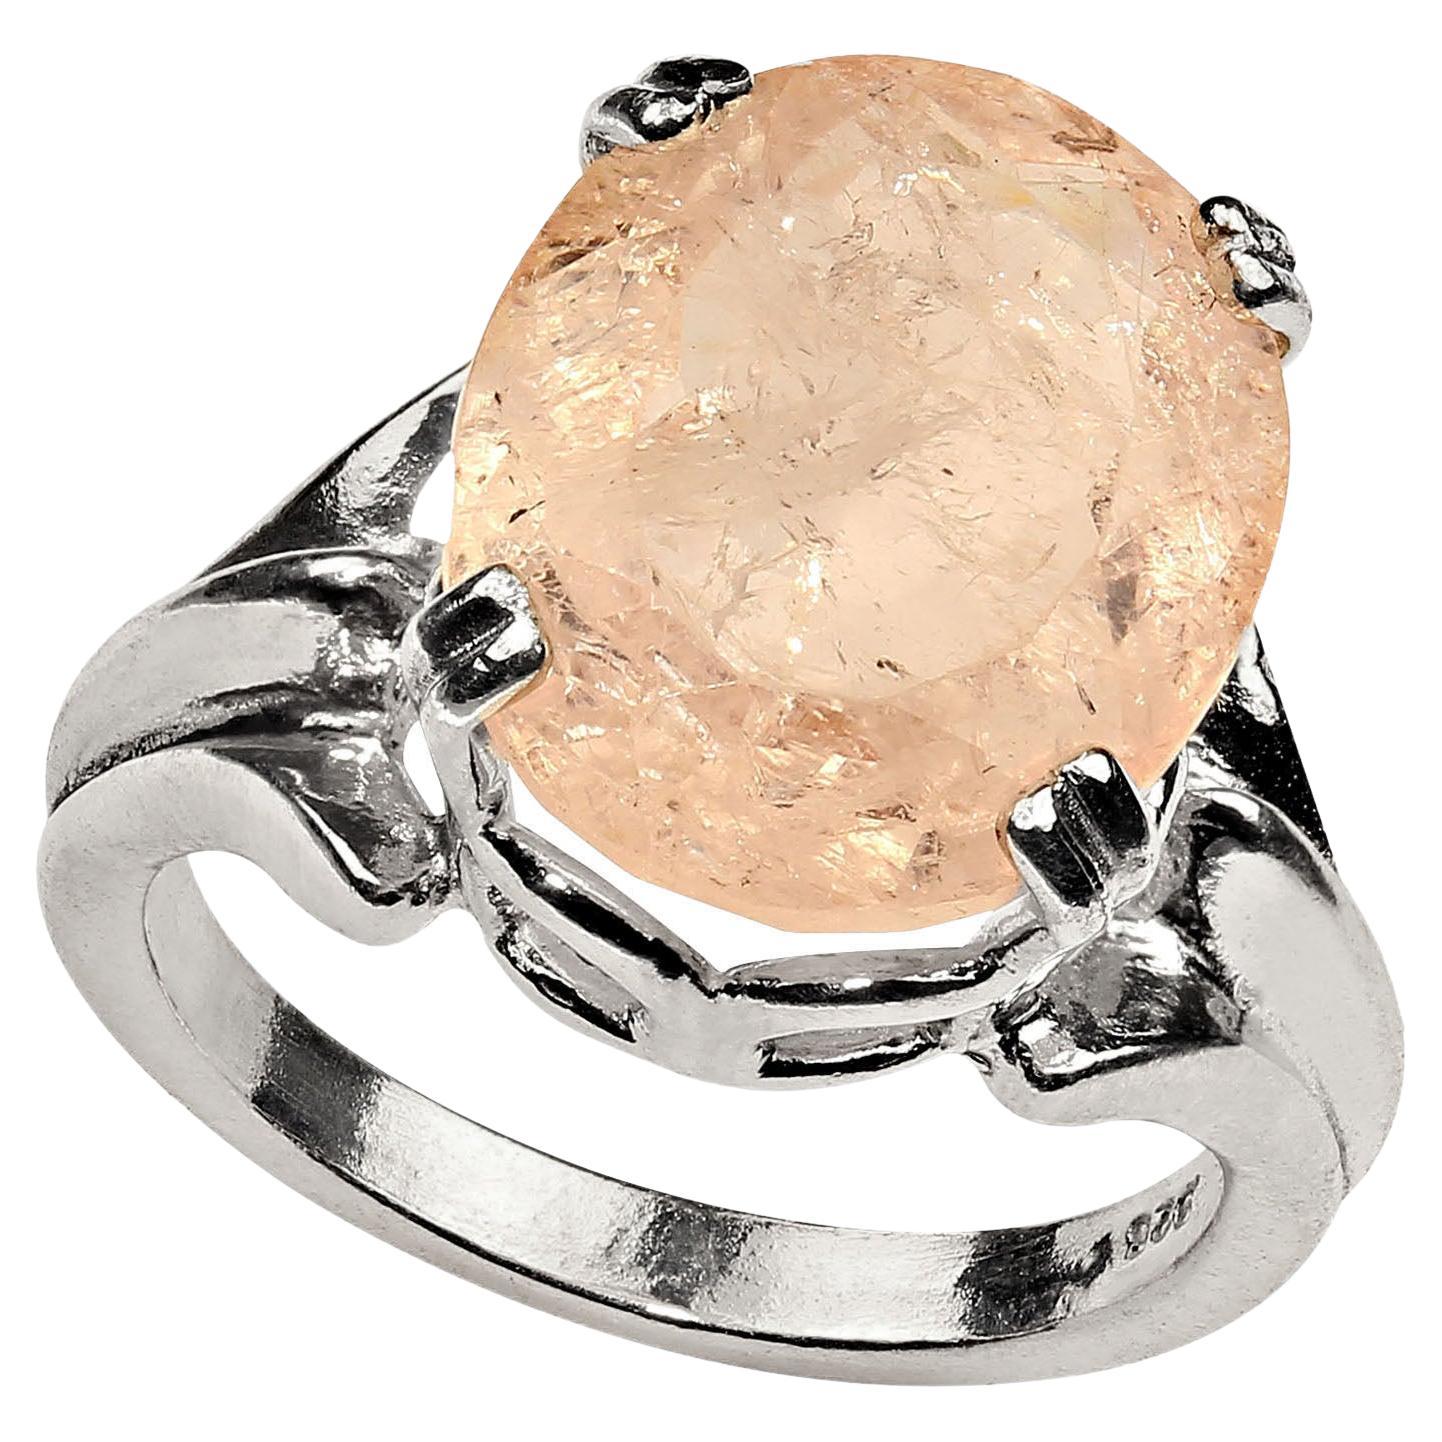 AJD Sparkling Pink 8.2 Carat Oval Morganite in Sterling Silver Ring  Great Gift! For Sale